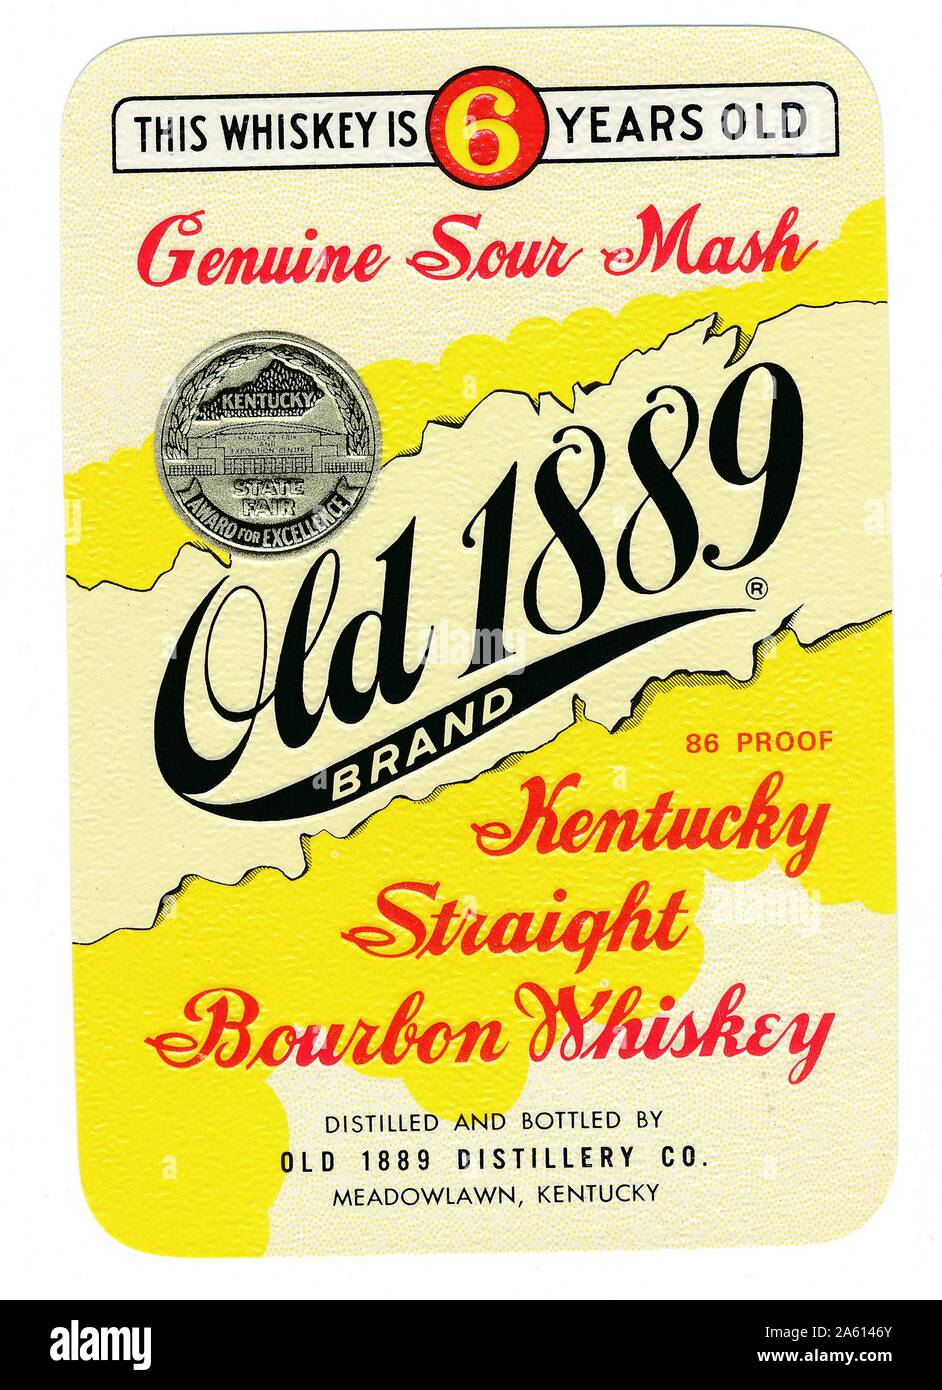 LOT OF 10 Unused Bottle Label's SOUTHERN DEW Kentucky Straight Bourbon Whisky 